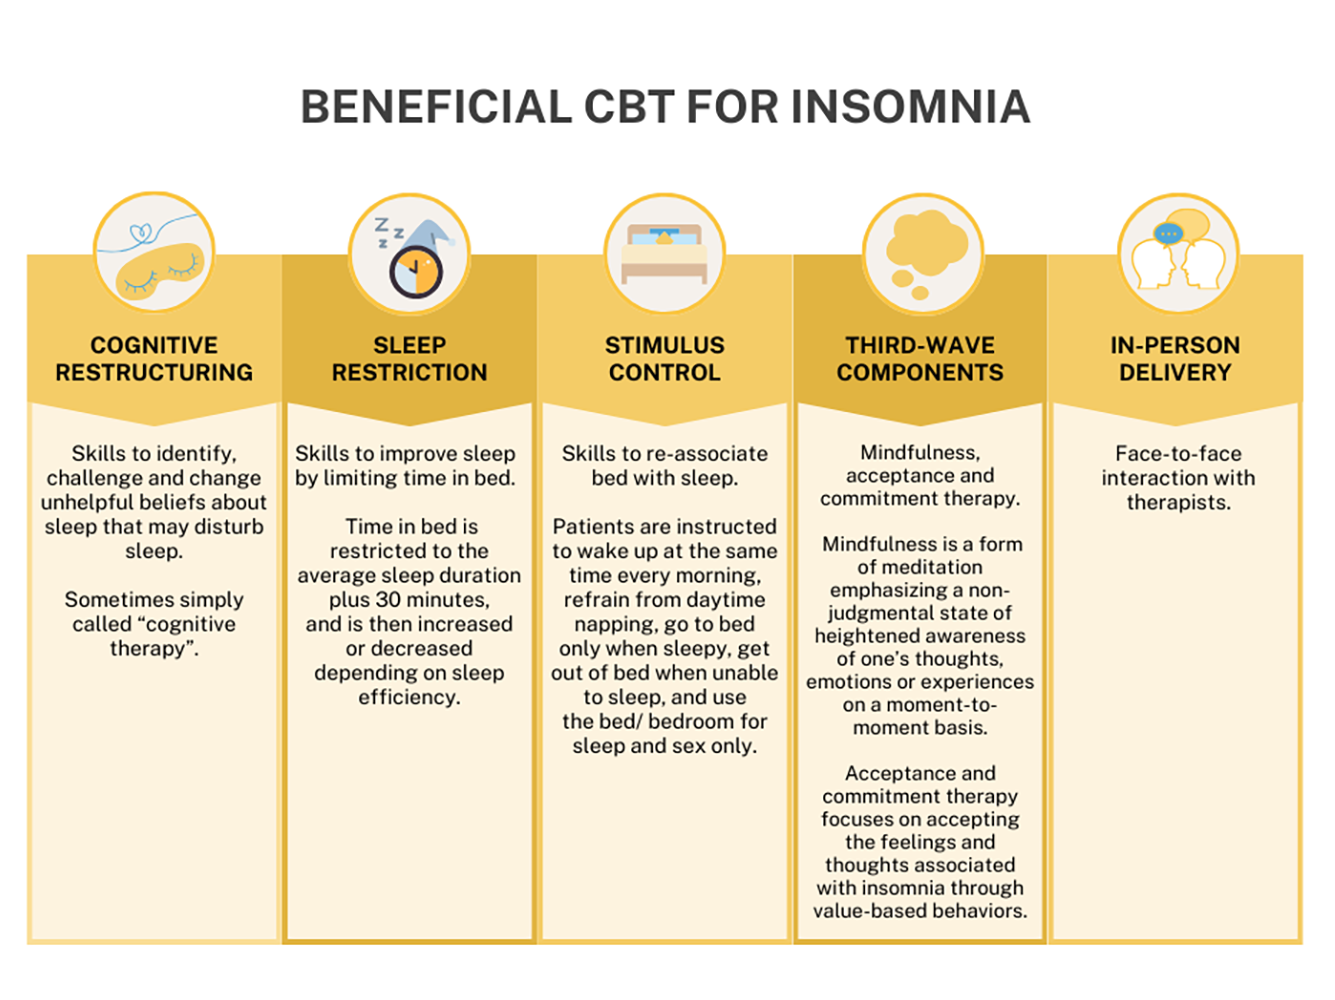 Infographic explaining the beneficial CBT methods for insomnia. The details can also be found in the research paper. 